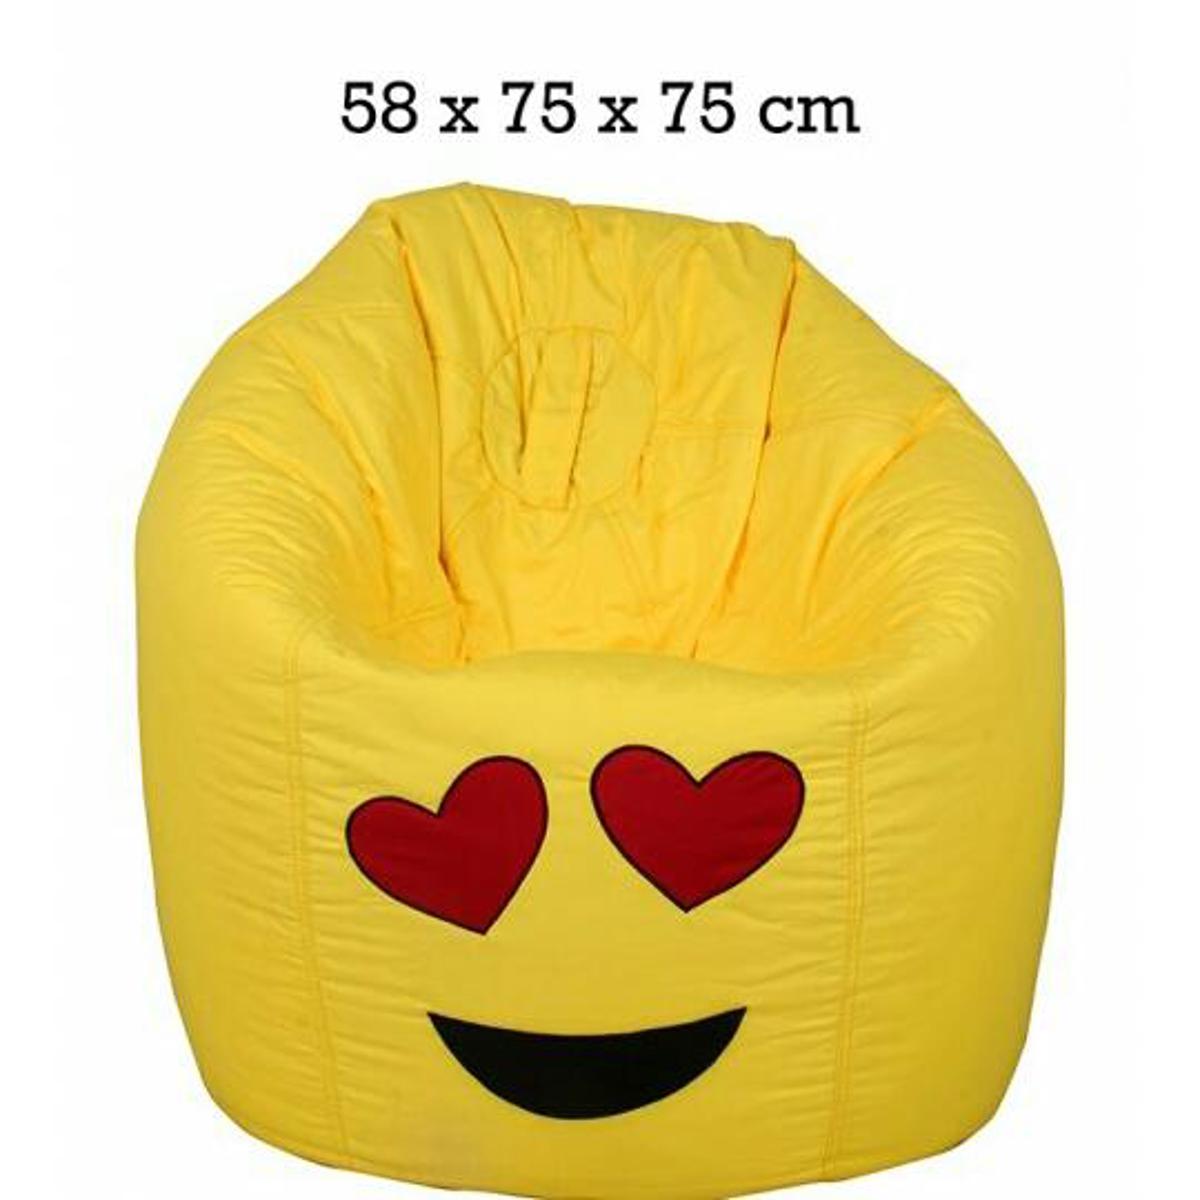 XL bean bag with beans for sale!, Furniture & Home Living, Furniture, Other  Home Furniture on Carousell